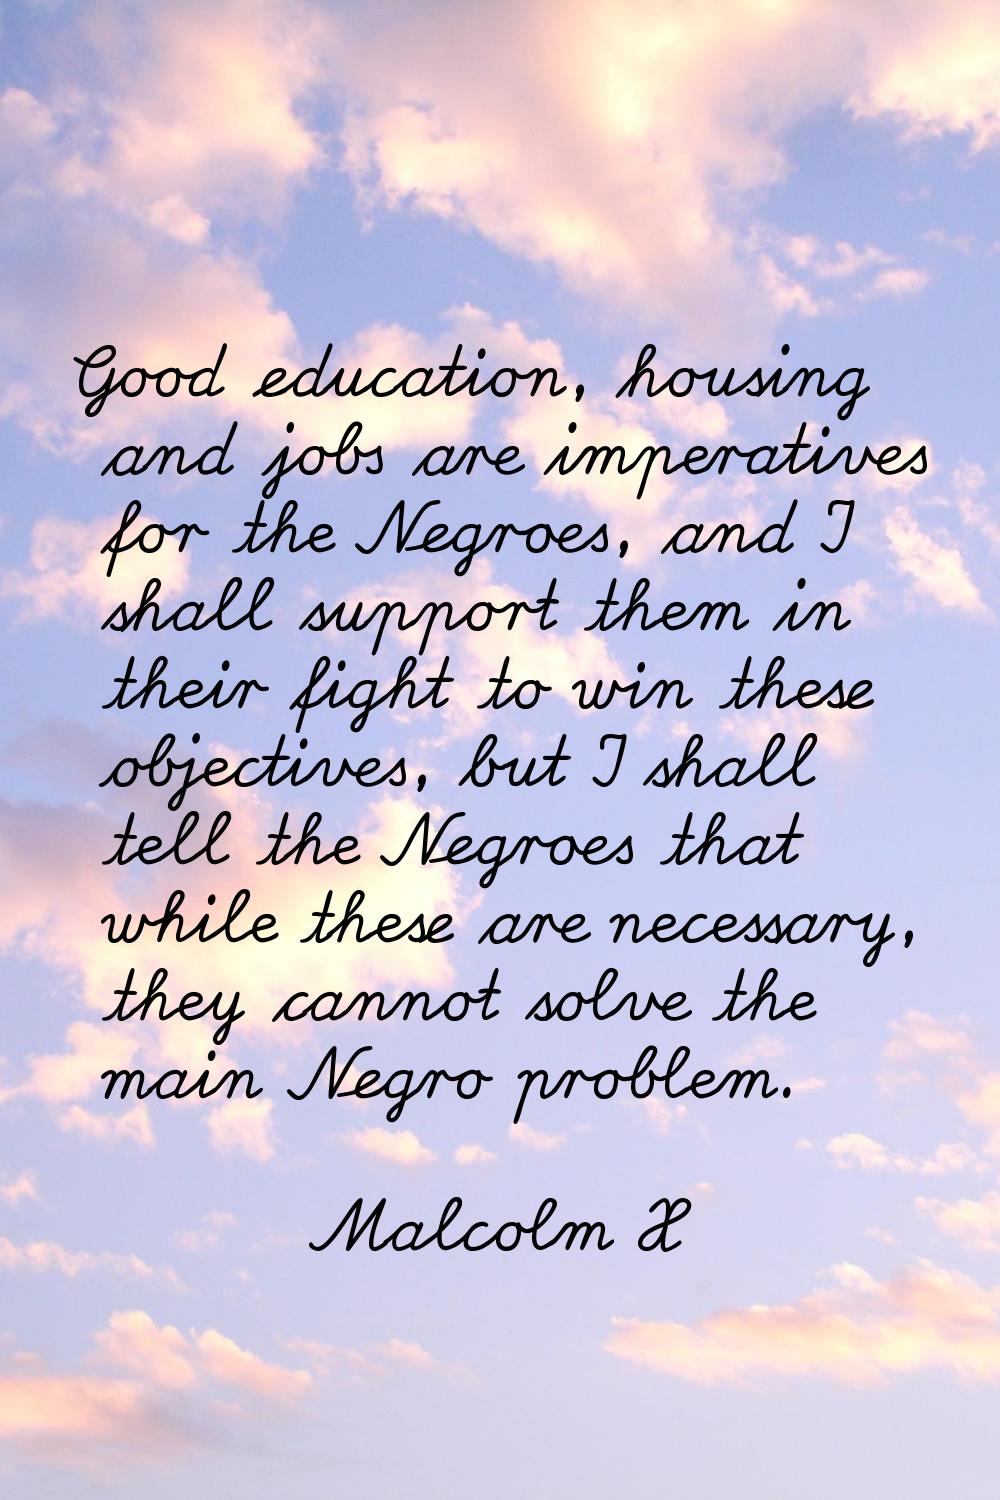 Good education, housing and jobs are imperatives for the Negroes, and I shall support them in their